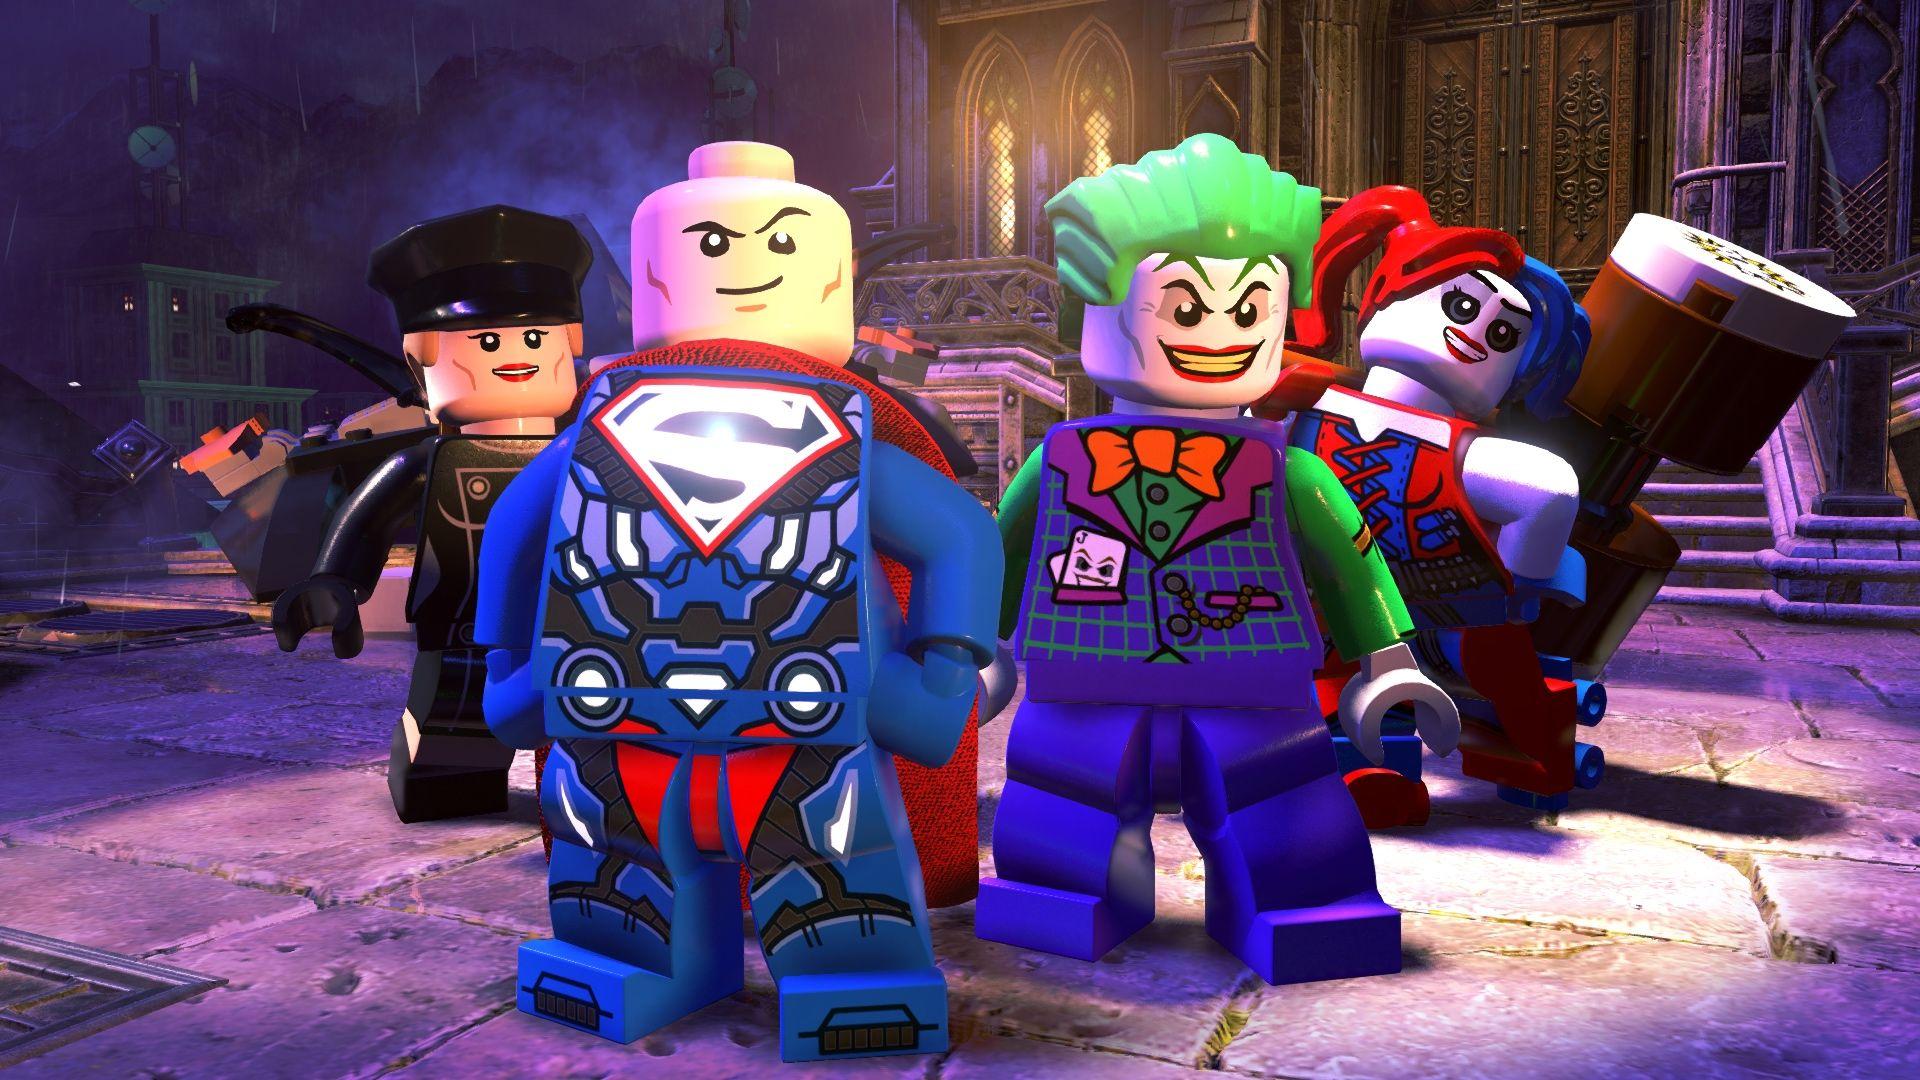 New Lego game lets you team up with Joker, Harley Quinn and other DC